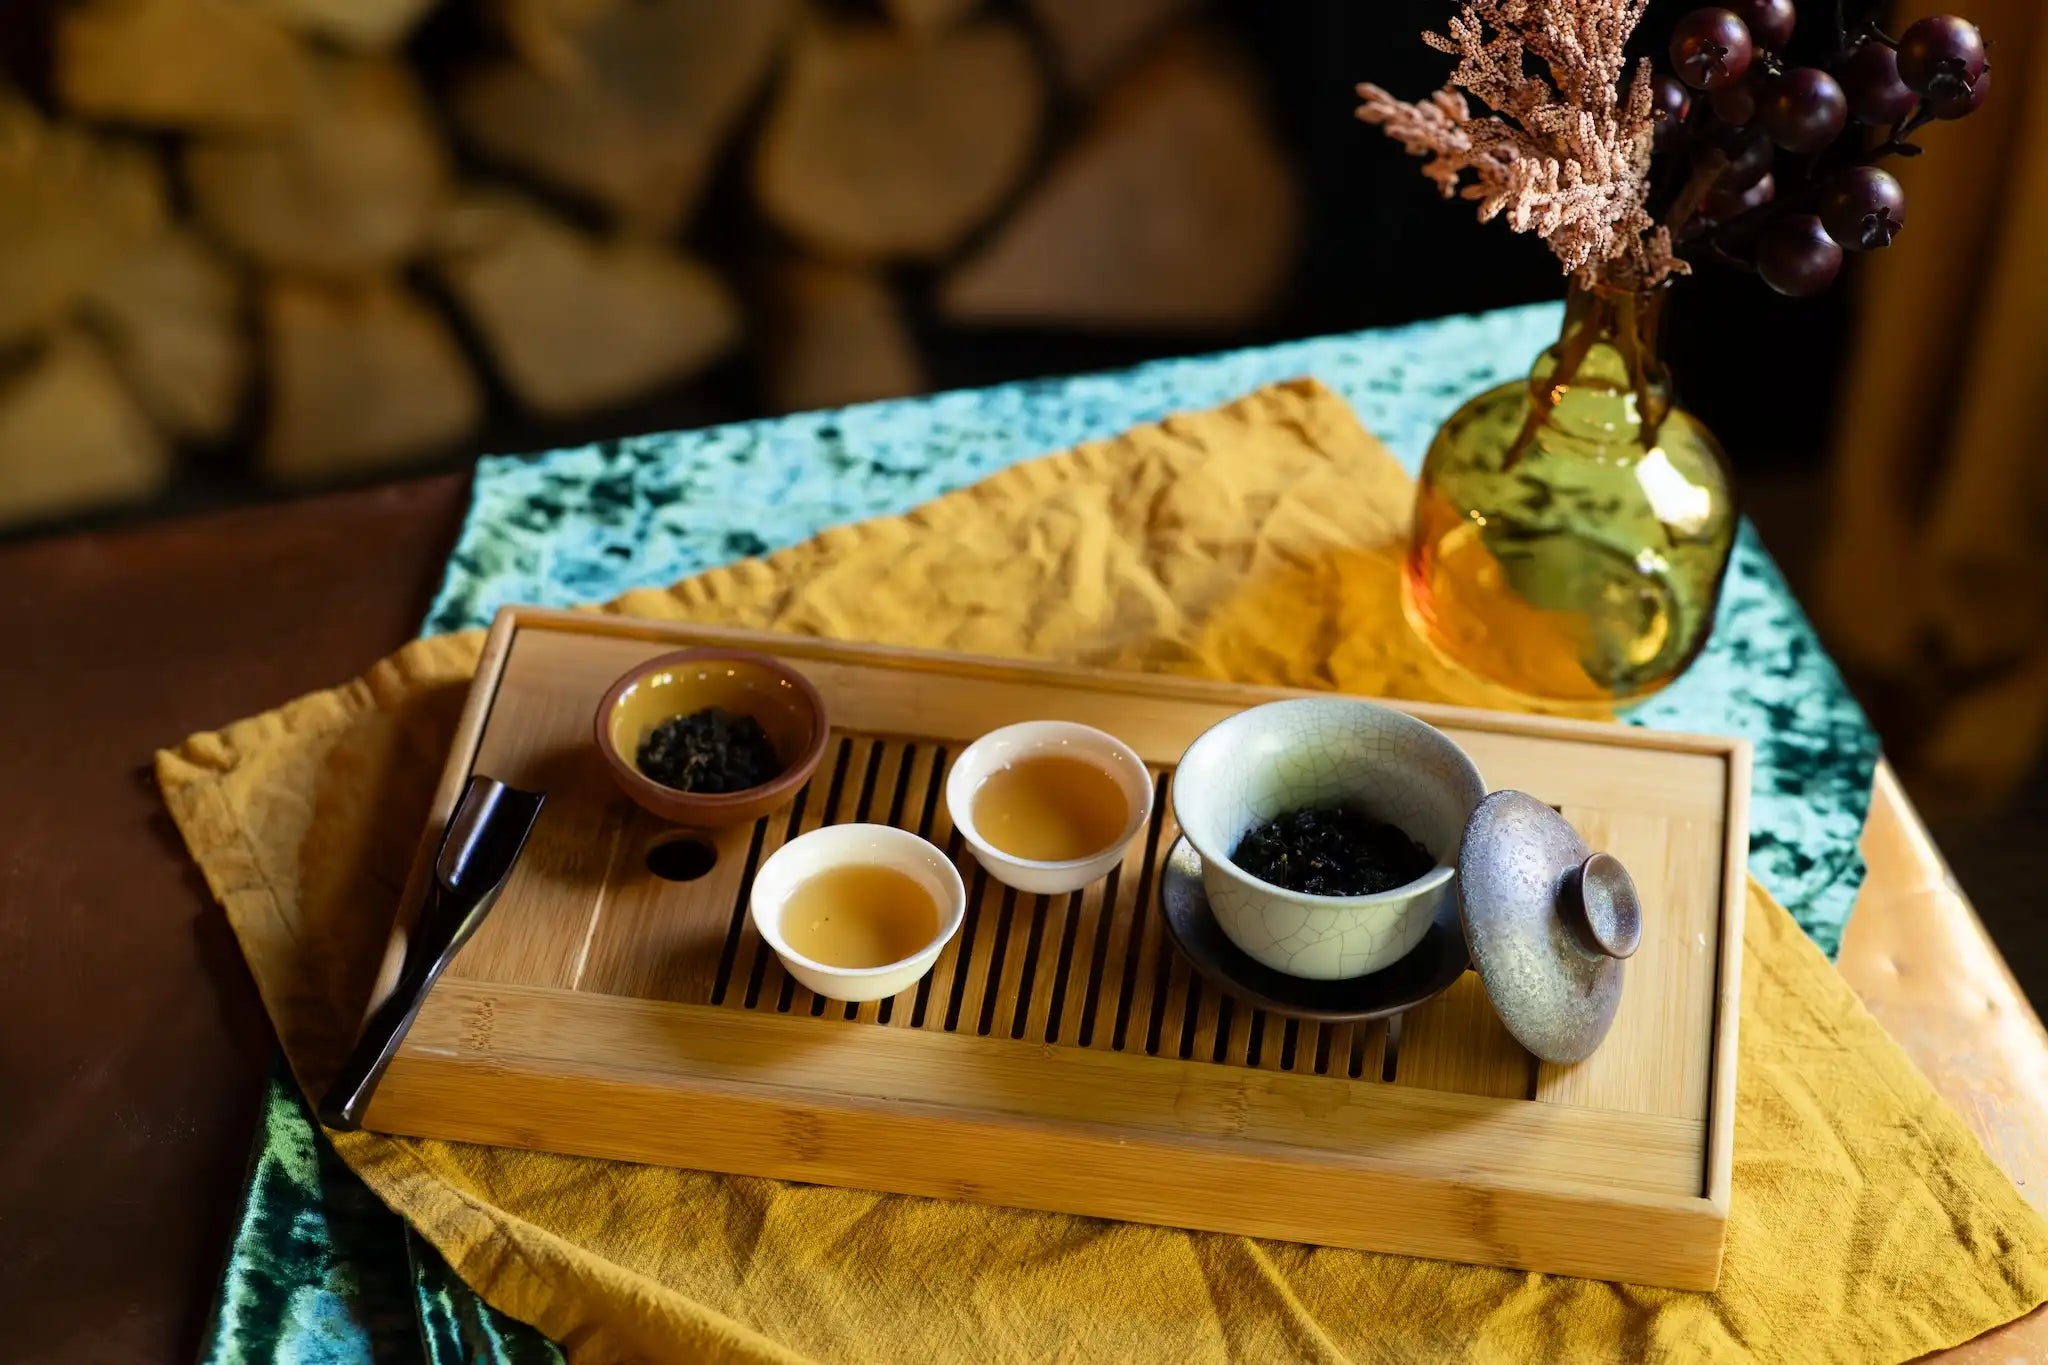 Dong Ding Taiwanese oolong tea served gongfu style in a gaiwan with two small cups